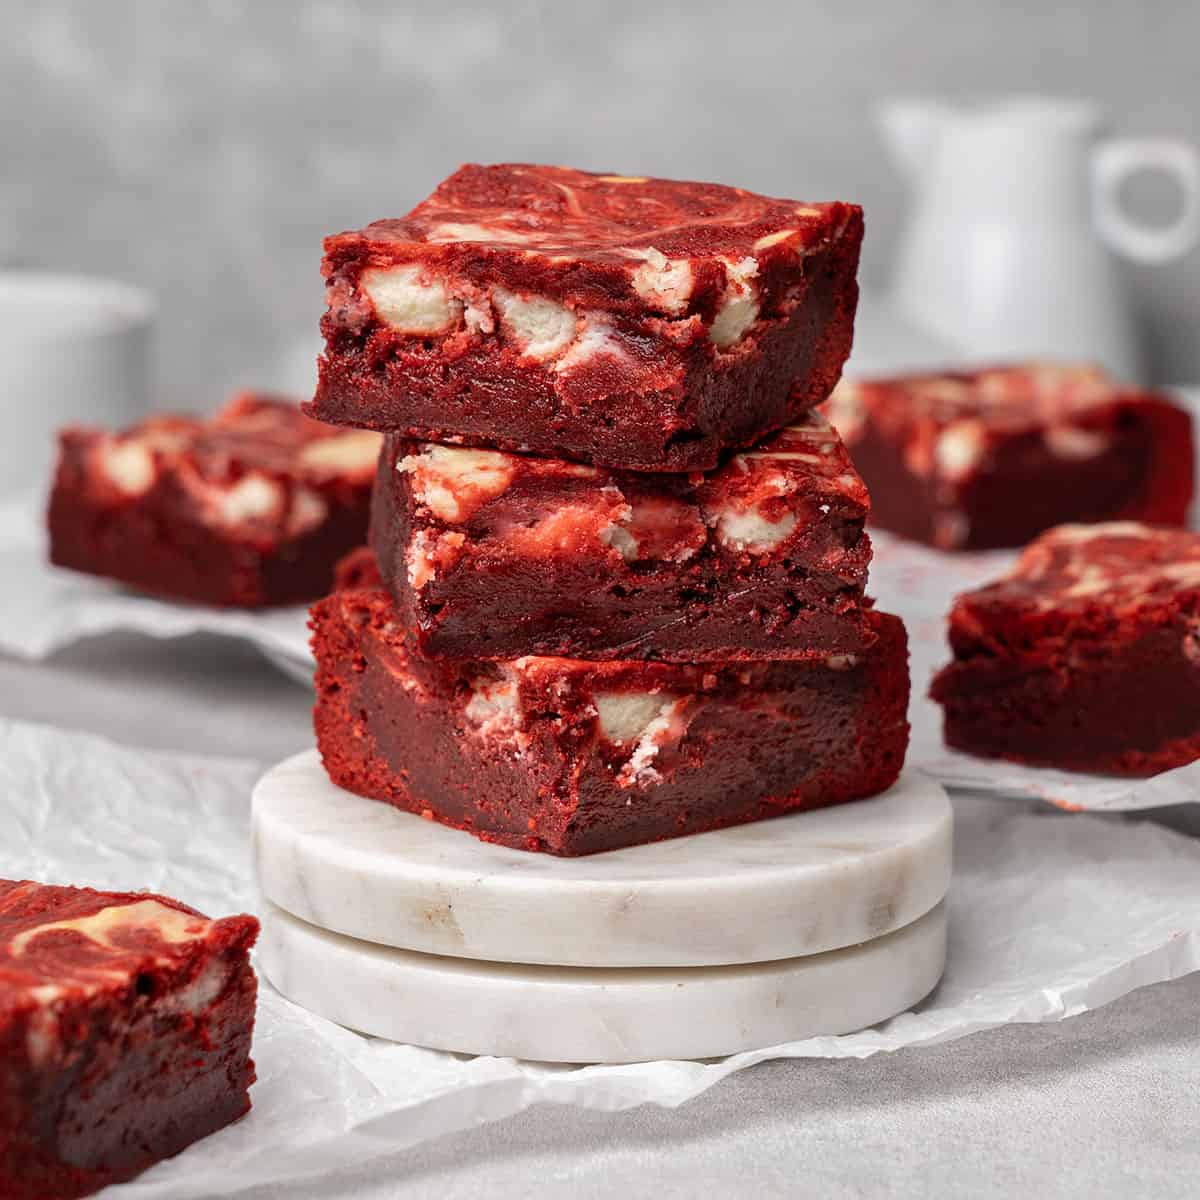 <p>These red velvet brownies are pure indulgence with their rich and fudgy texture. A luscious cream cheese swirl makes them even more decadent, showcasing these brownies as beautiful as they are easy to make. The secret to their dense and moist bite is skipping the baking powder and slightly underbaking them. This results in fudgey brownie bliss every time.</p> <p><strong>Go to the recipe: <a href="https://www.spatuladesserts.com/red-velvet-brownies/">Red Velvet Brownies</a></strong></p>